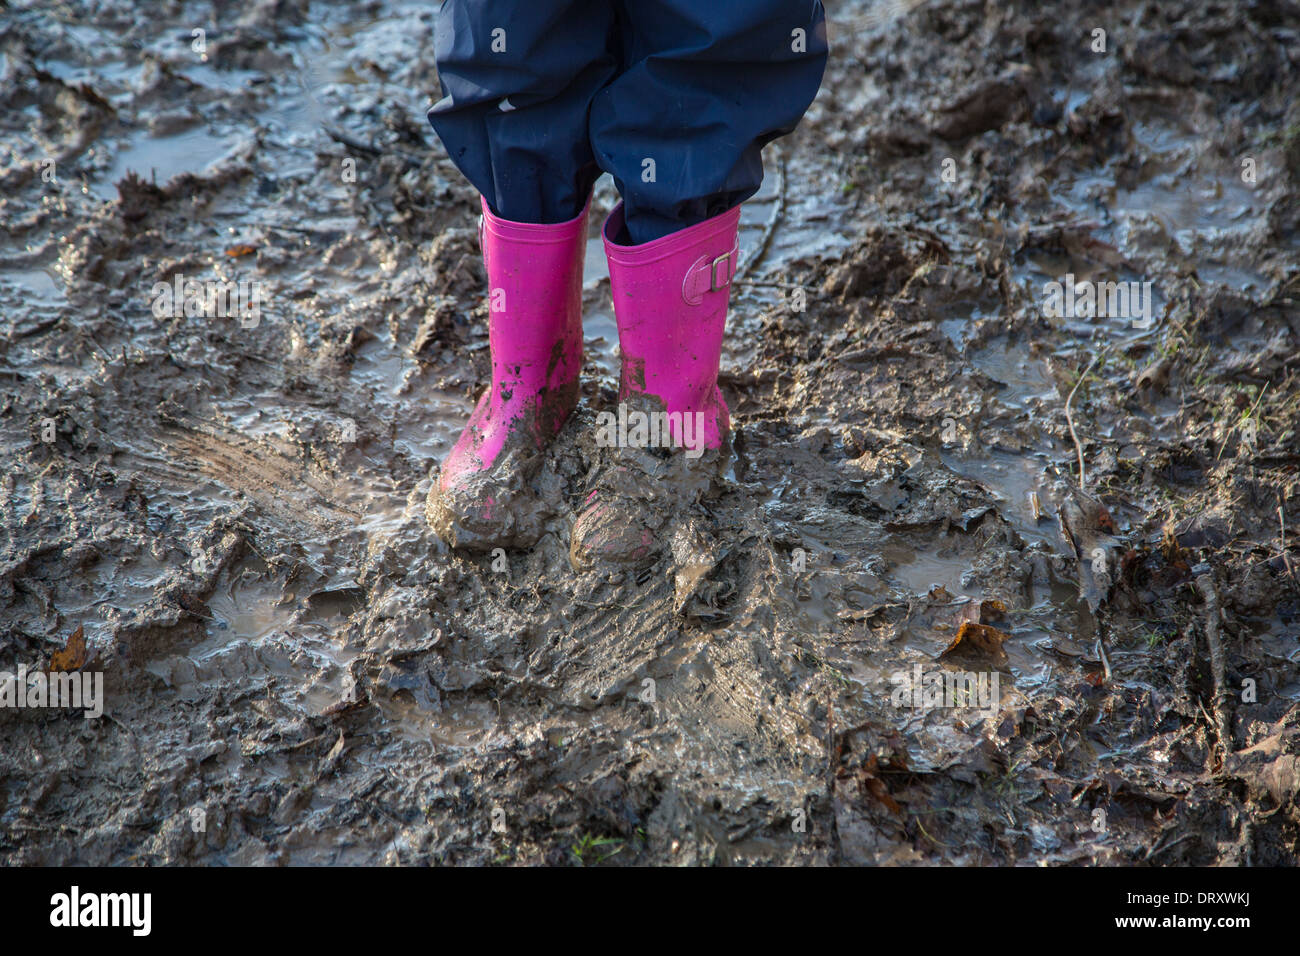 Young Girl in Wellies, standing in Mud Stock Photo